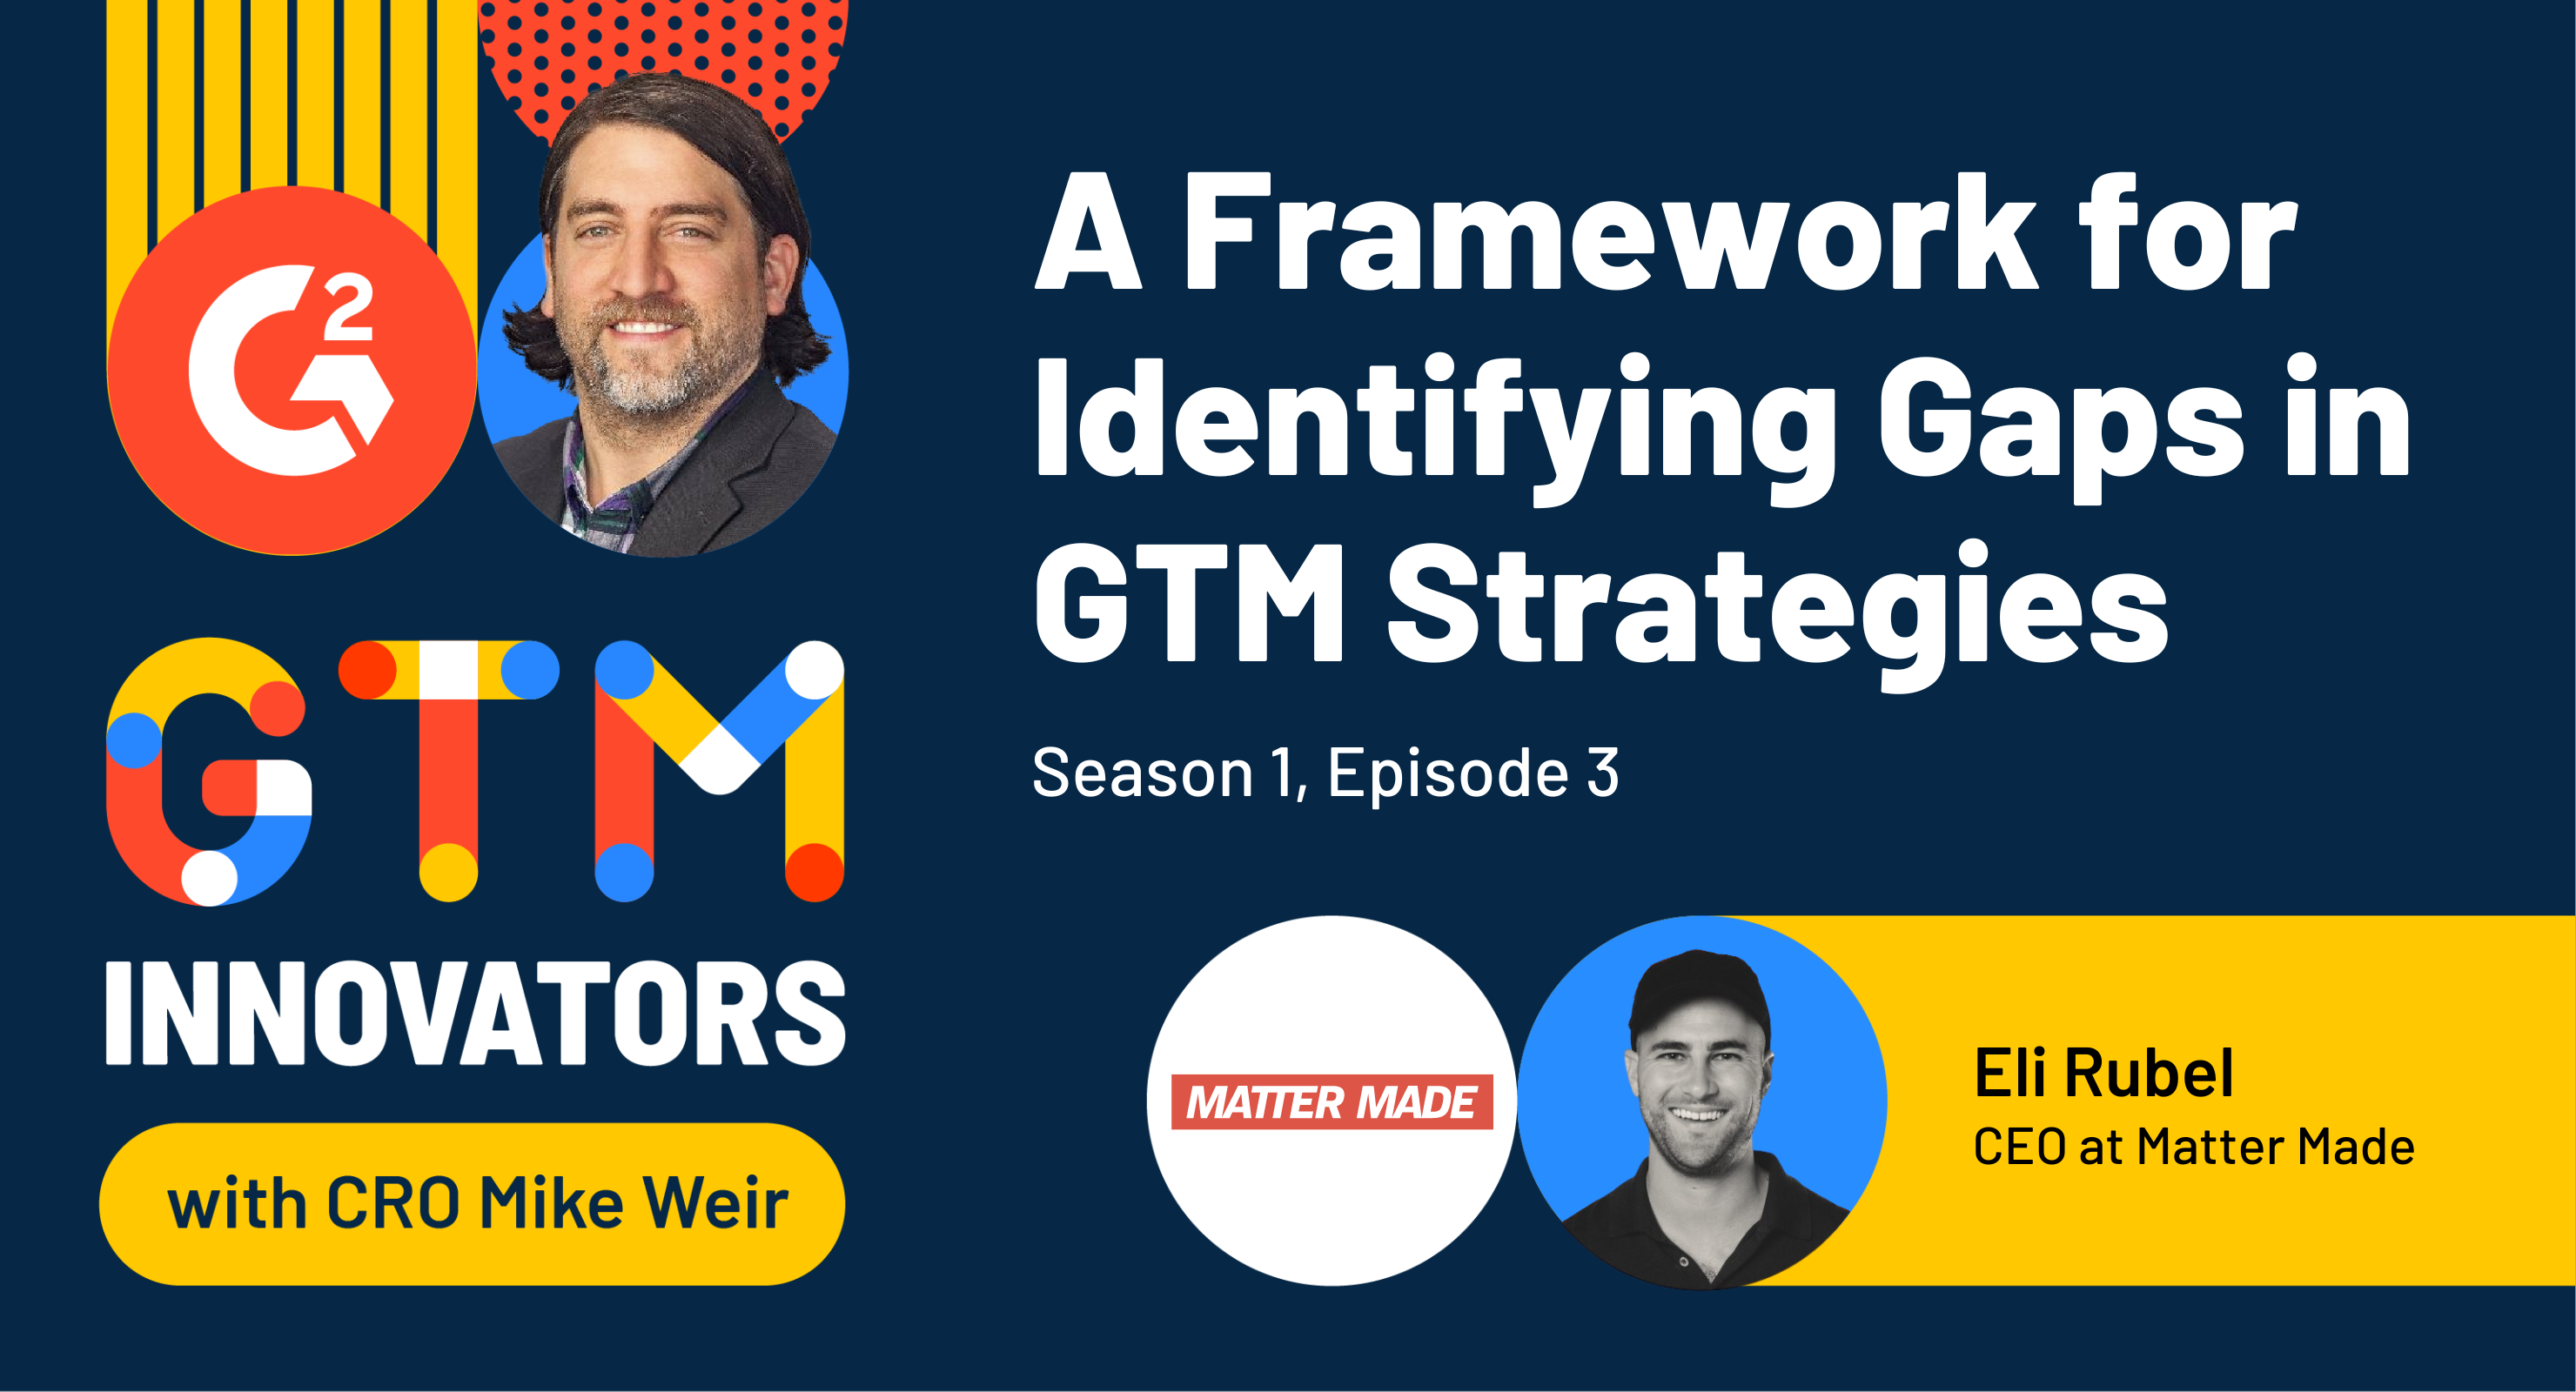 GTM Innovators episode 3 with Eli Rubel of Matter Made